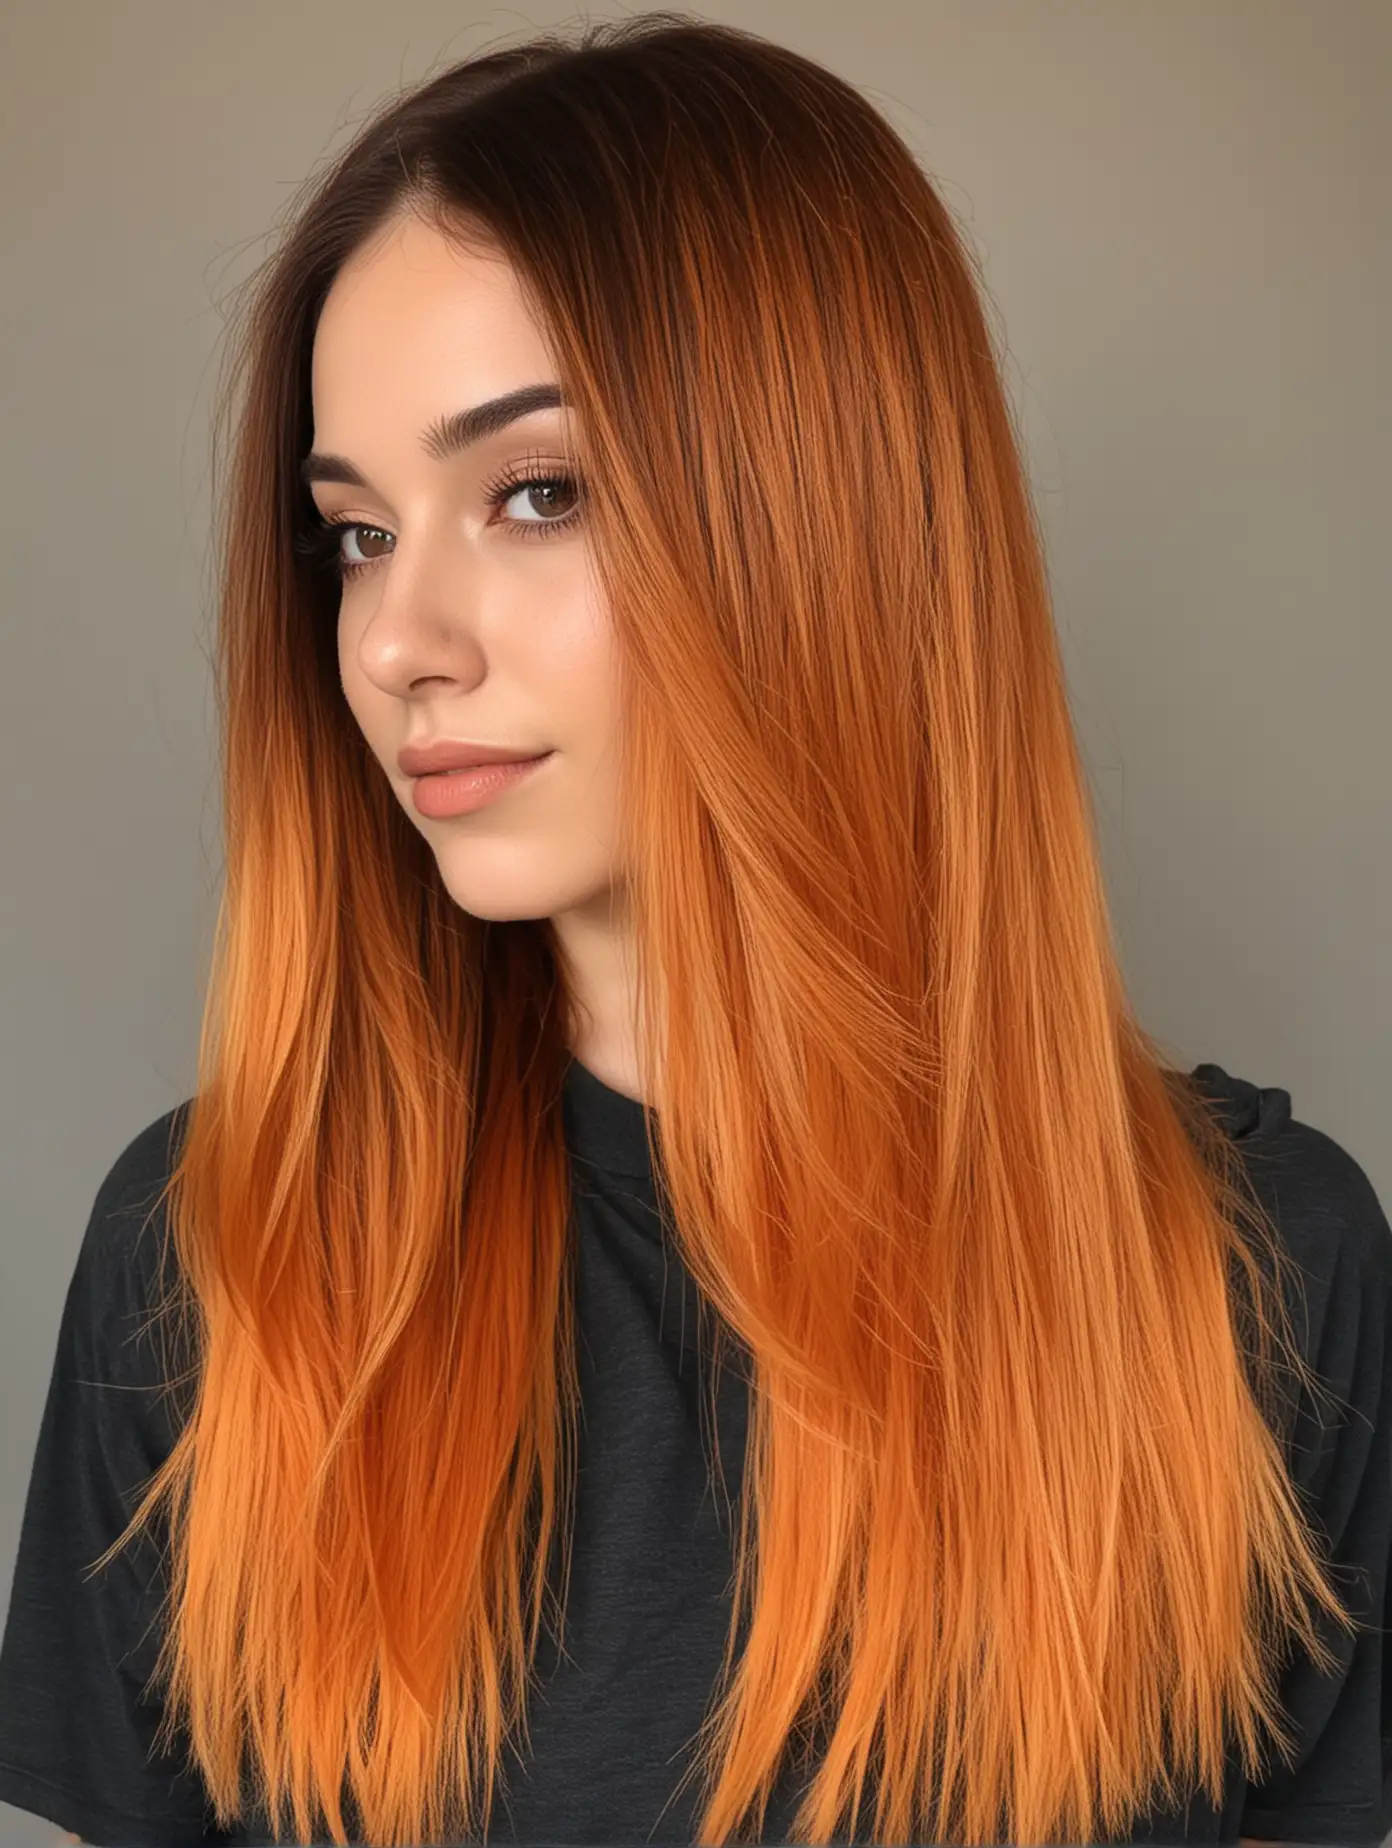 Woman with Vibrant Straight Orange Ombre Hair